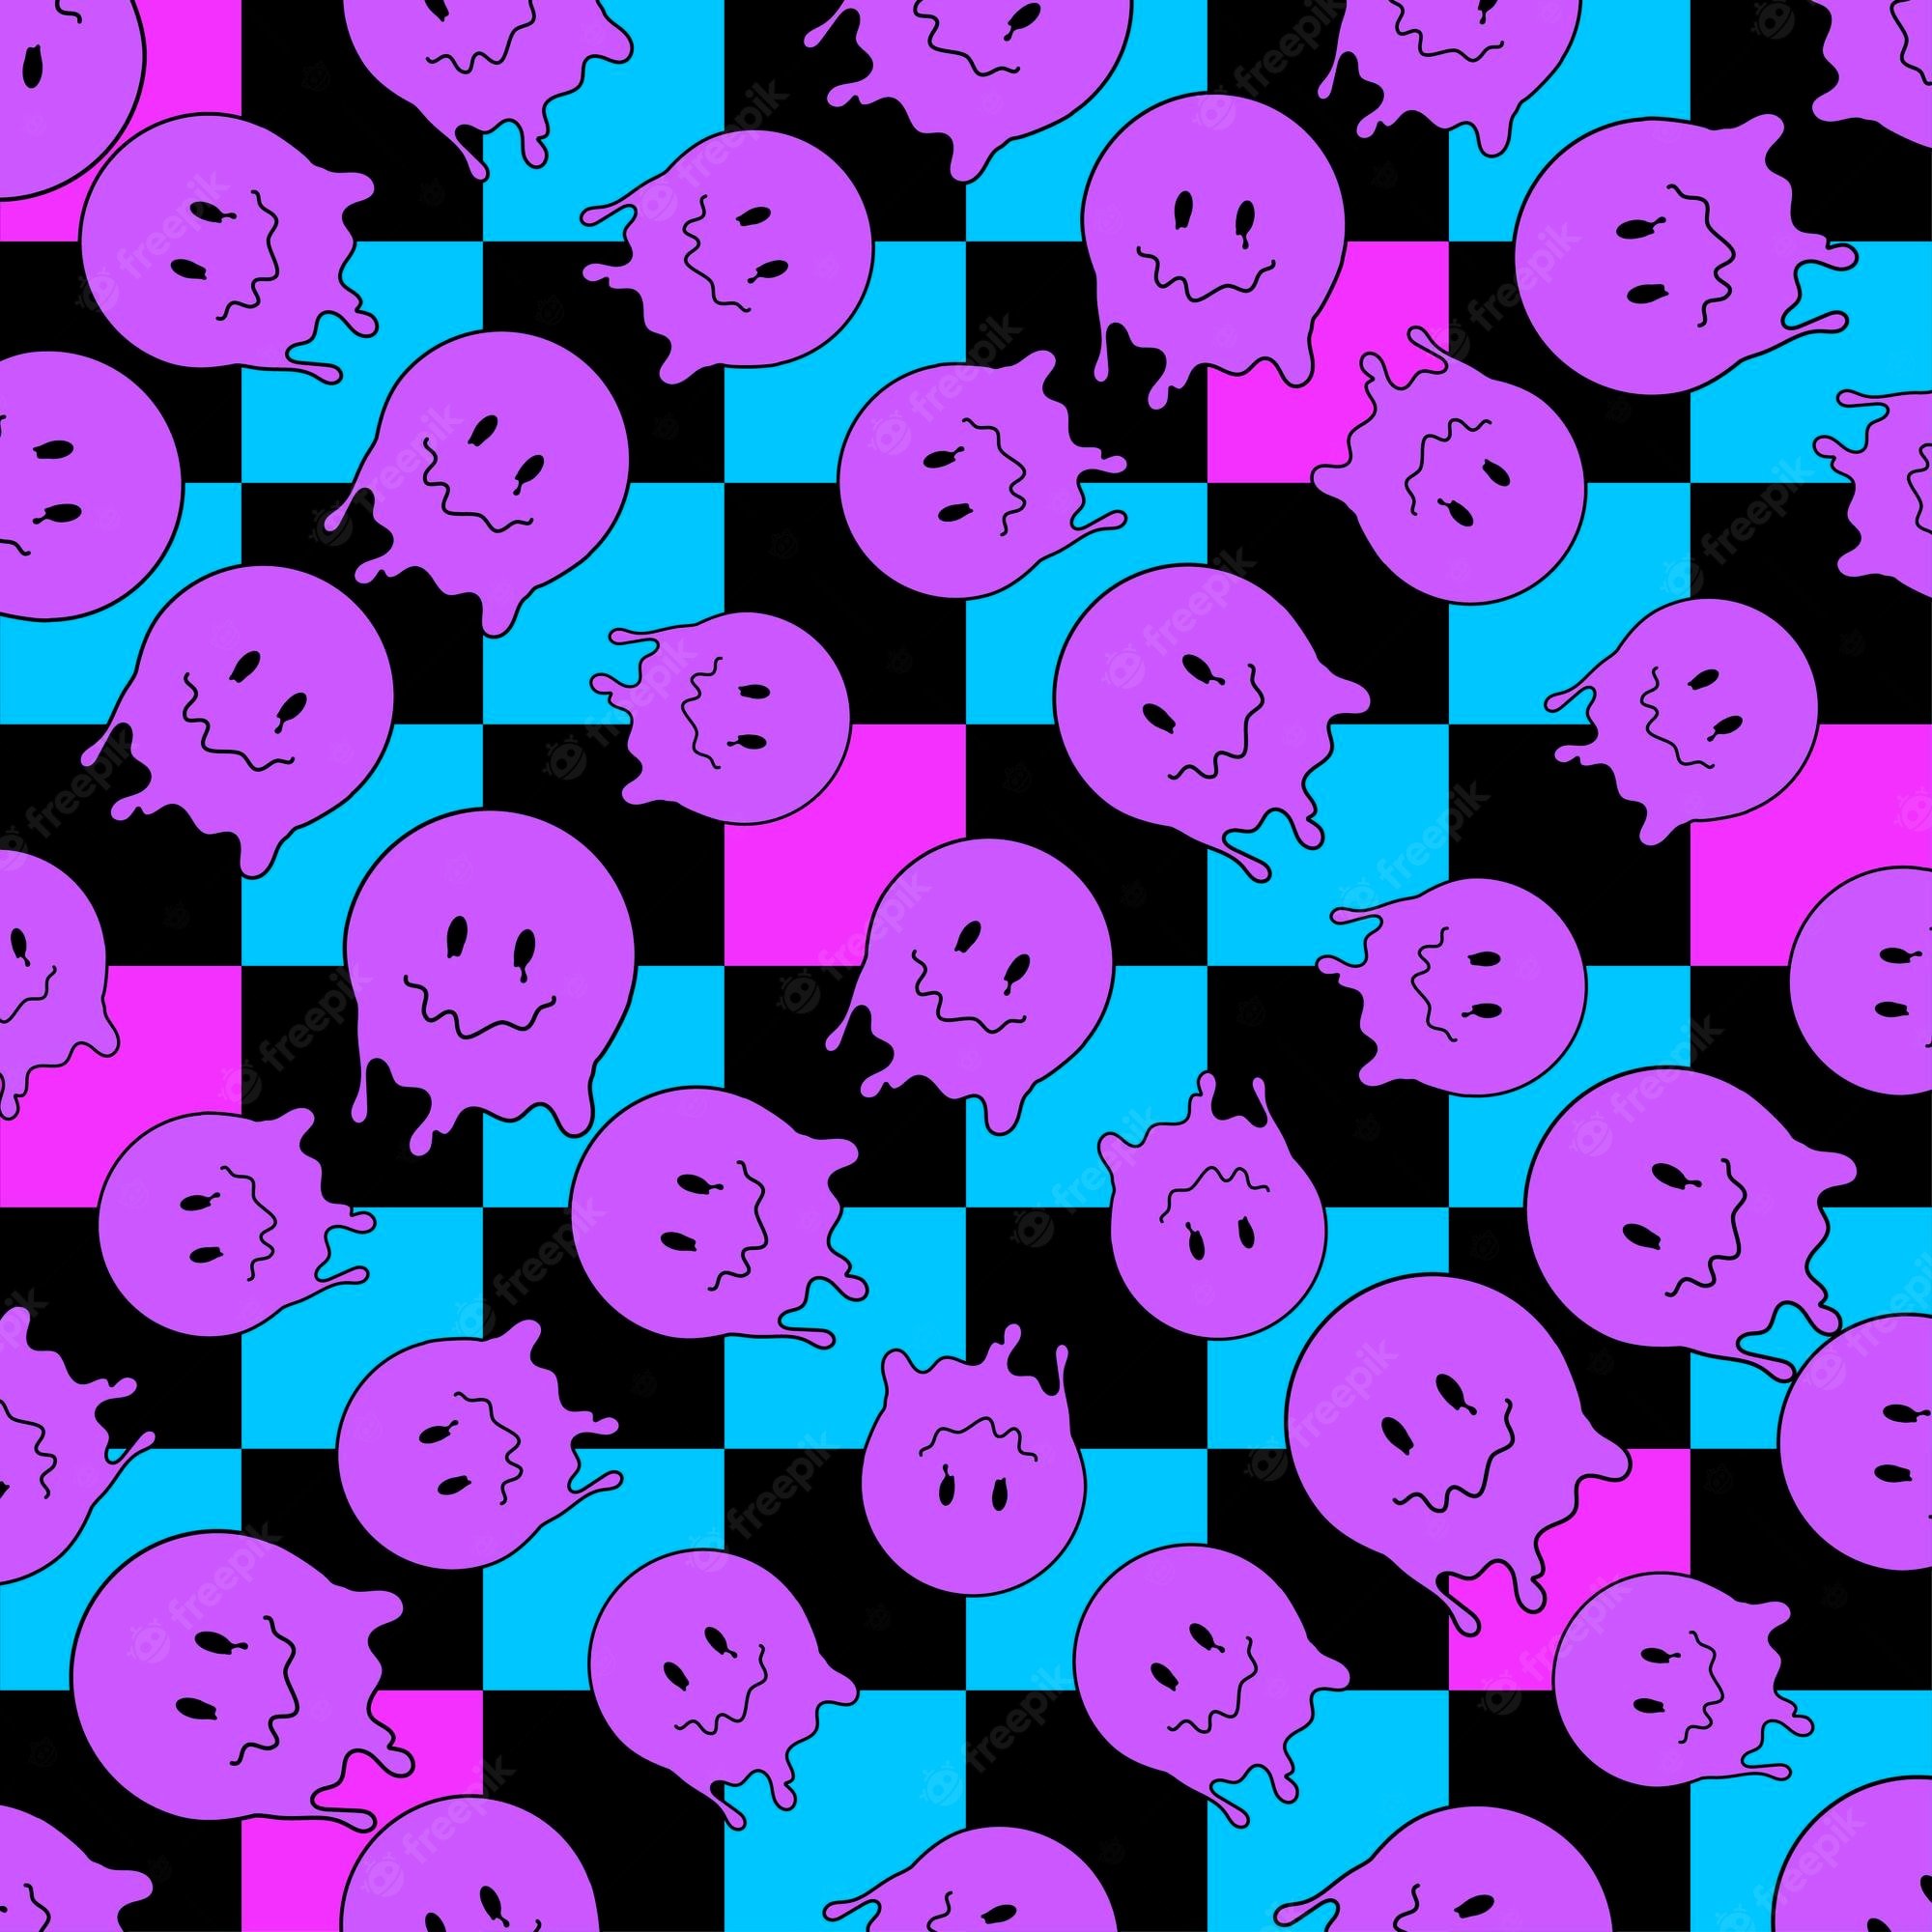 Premium Vector. Funny smile dope faces seamless pattern psychedelic surreal techno melt smile background trippy smiley faces techno melting smile face cartoon background wallpaper concept art y2k aesthetic